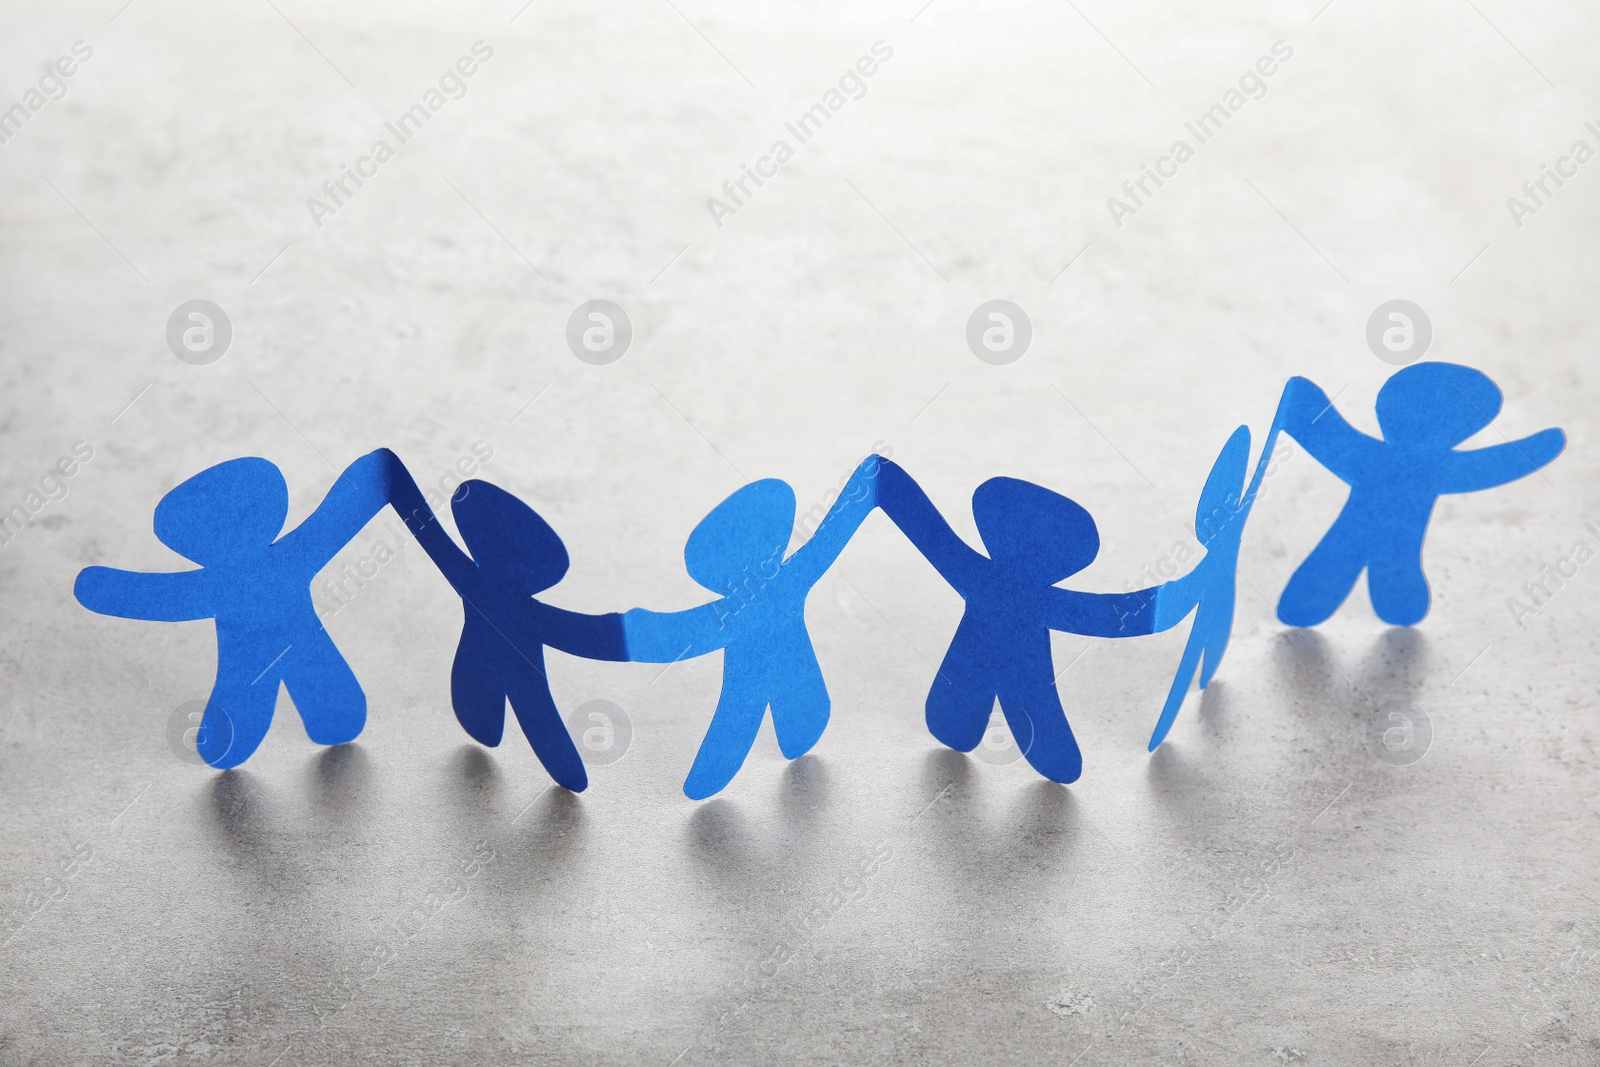 Photo of Paper people chain on light background. Helping and supporting concept